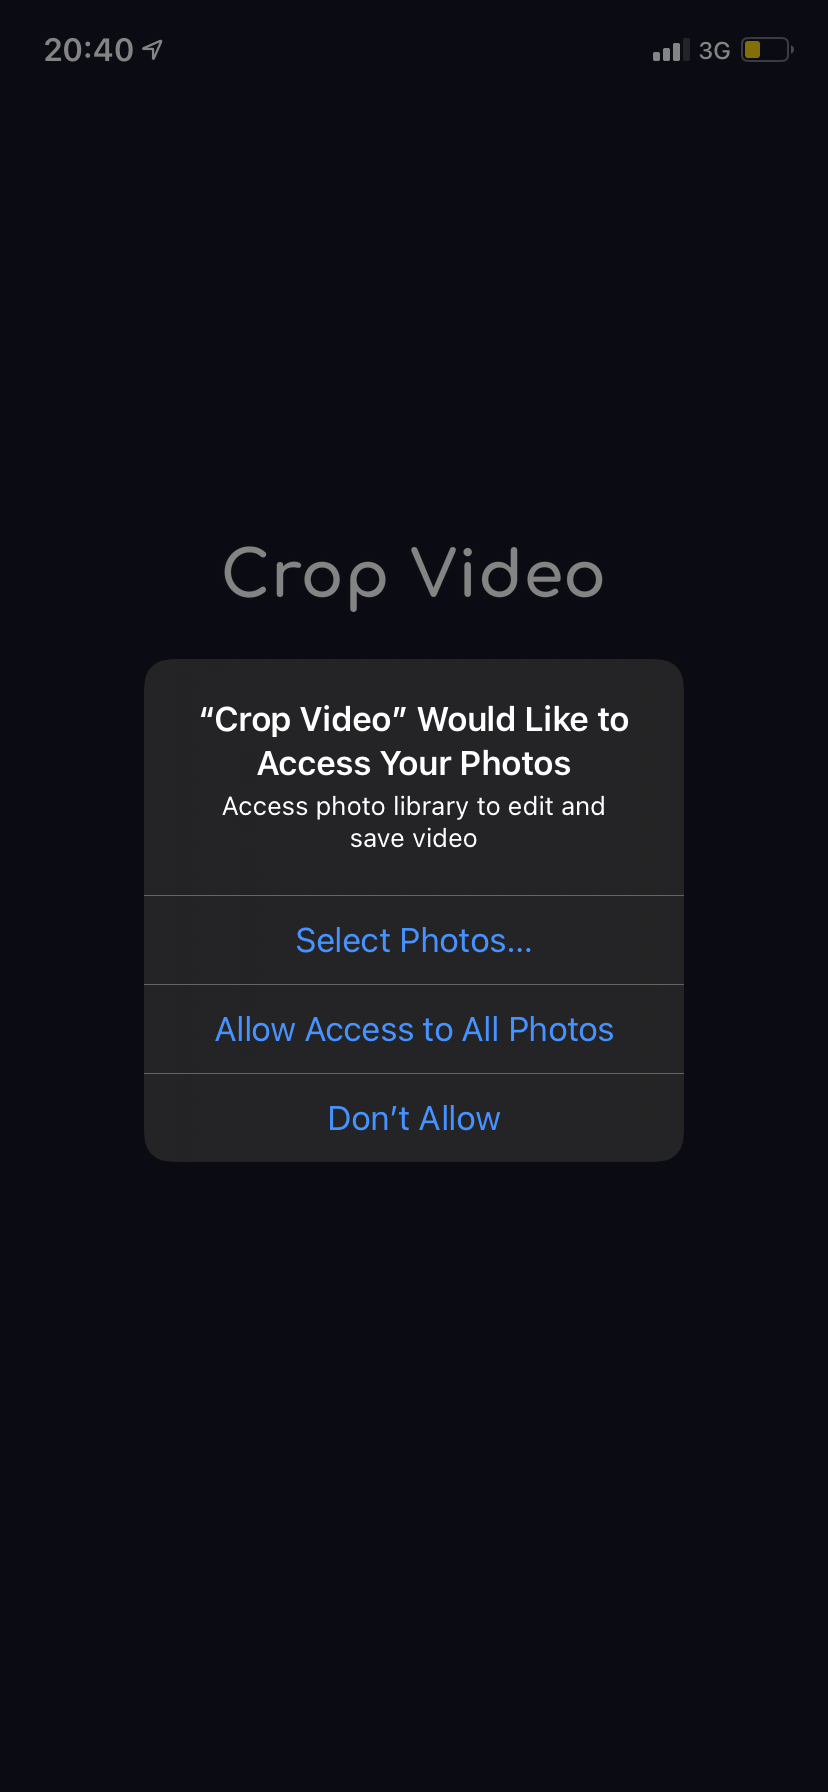 launching Crop Video app for the first time